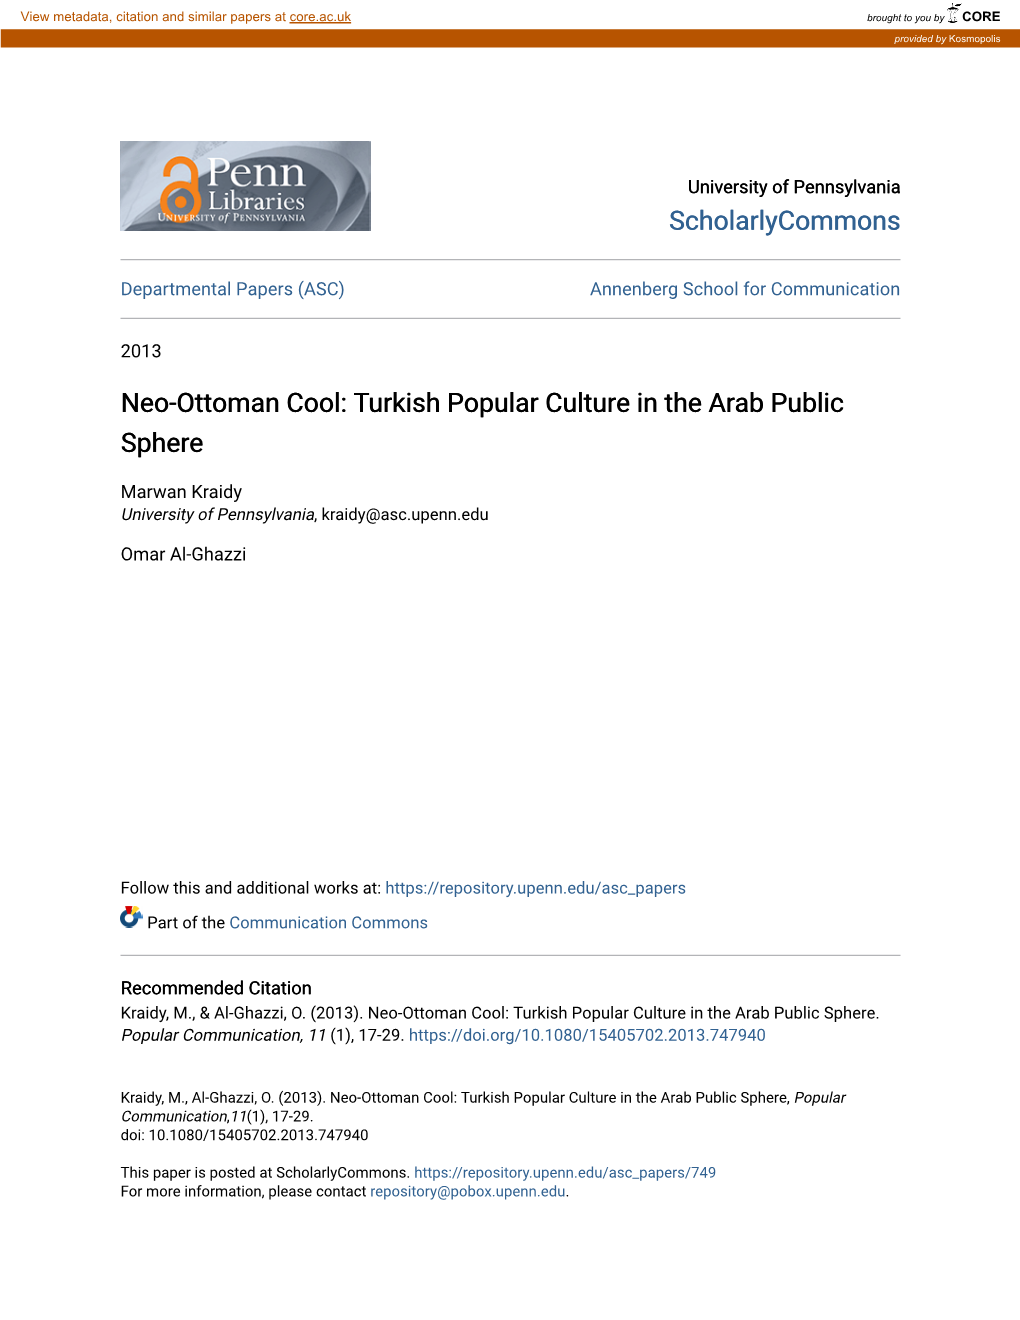 Neo-Ottoman Cool: Turkish Popular Culture in the Arab Public Sphere